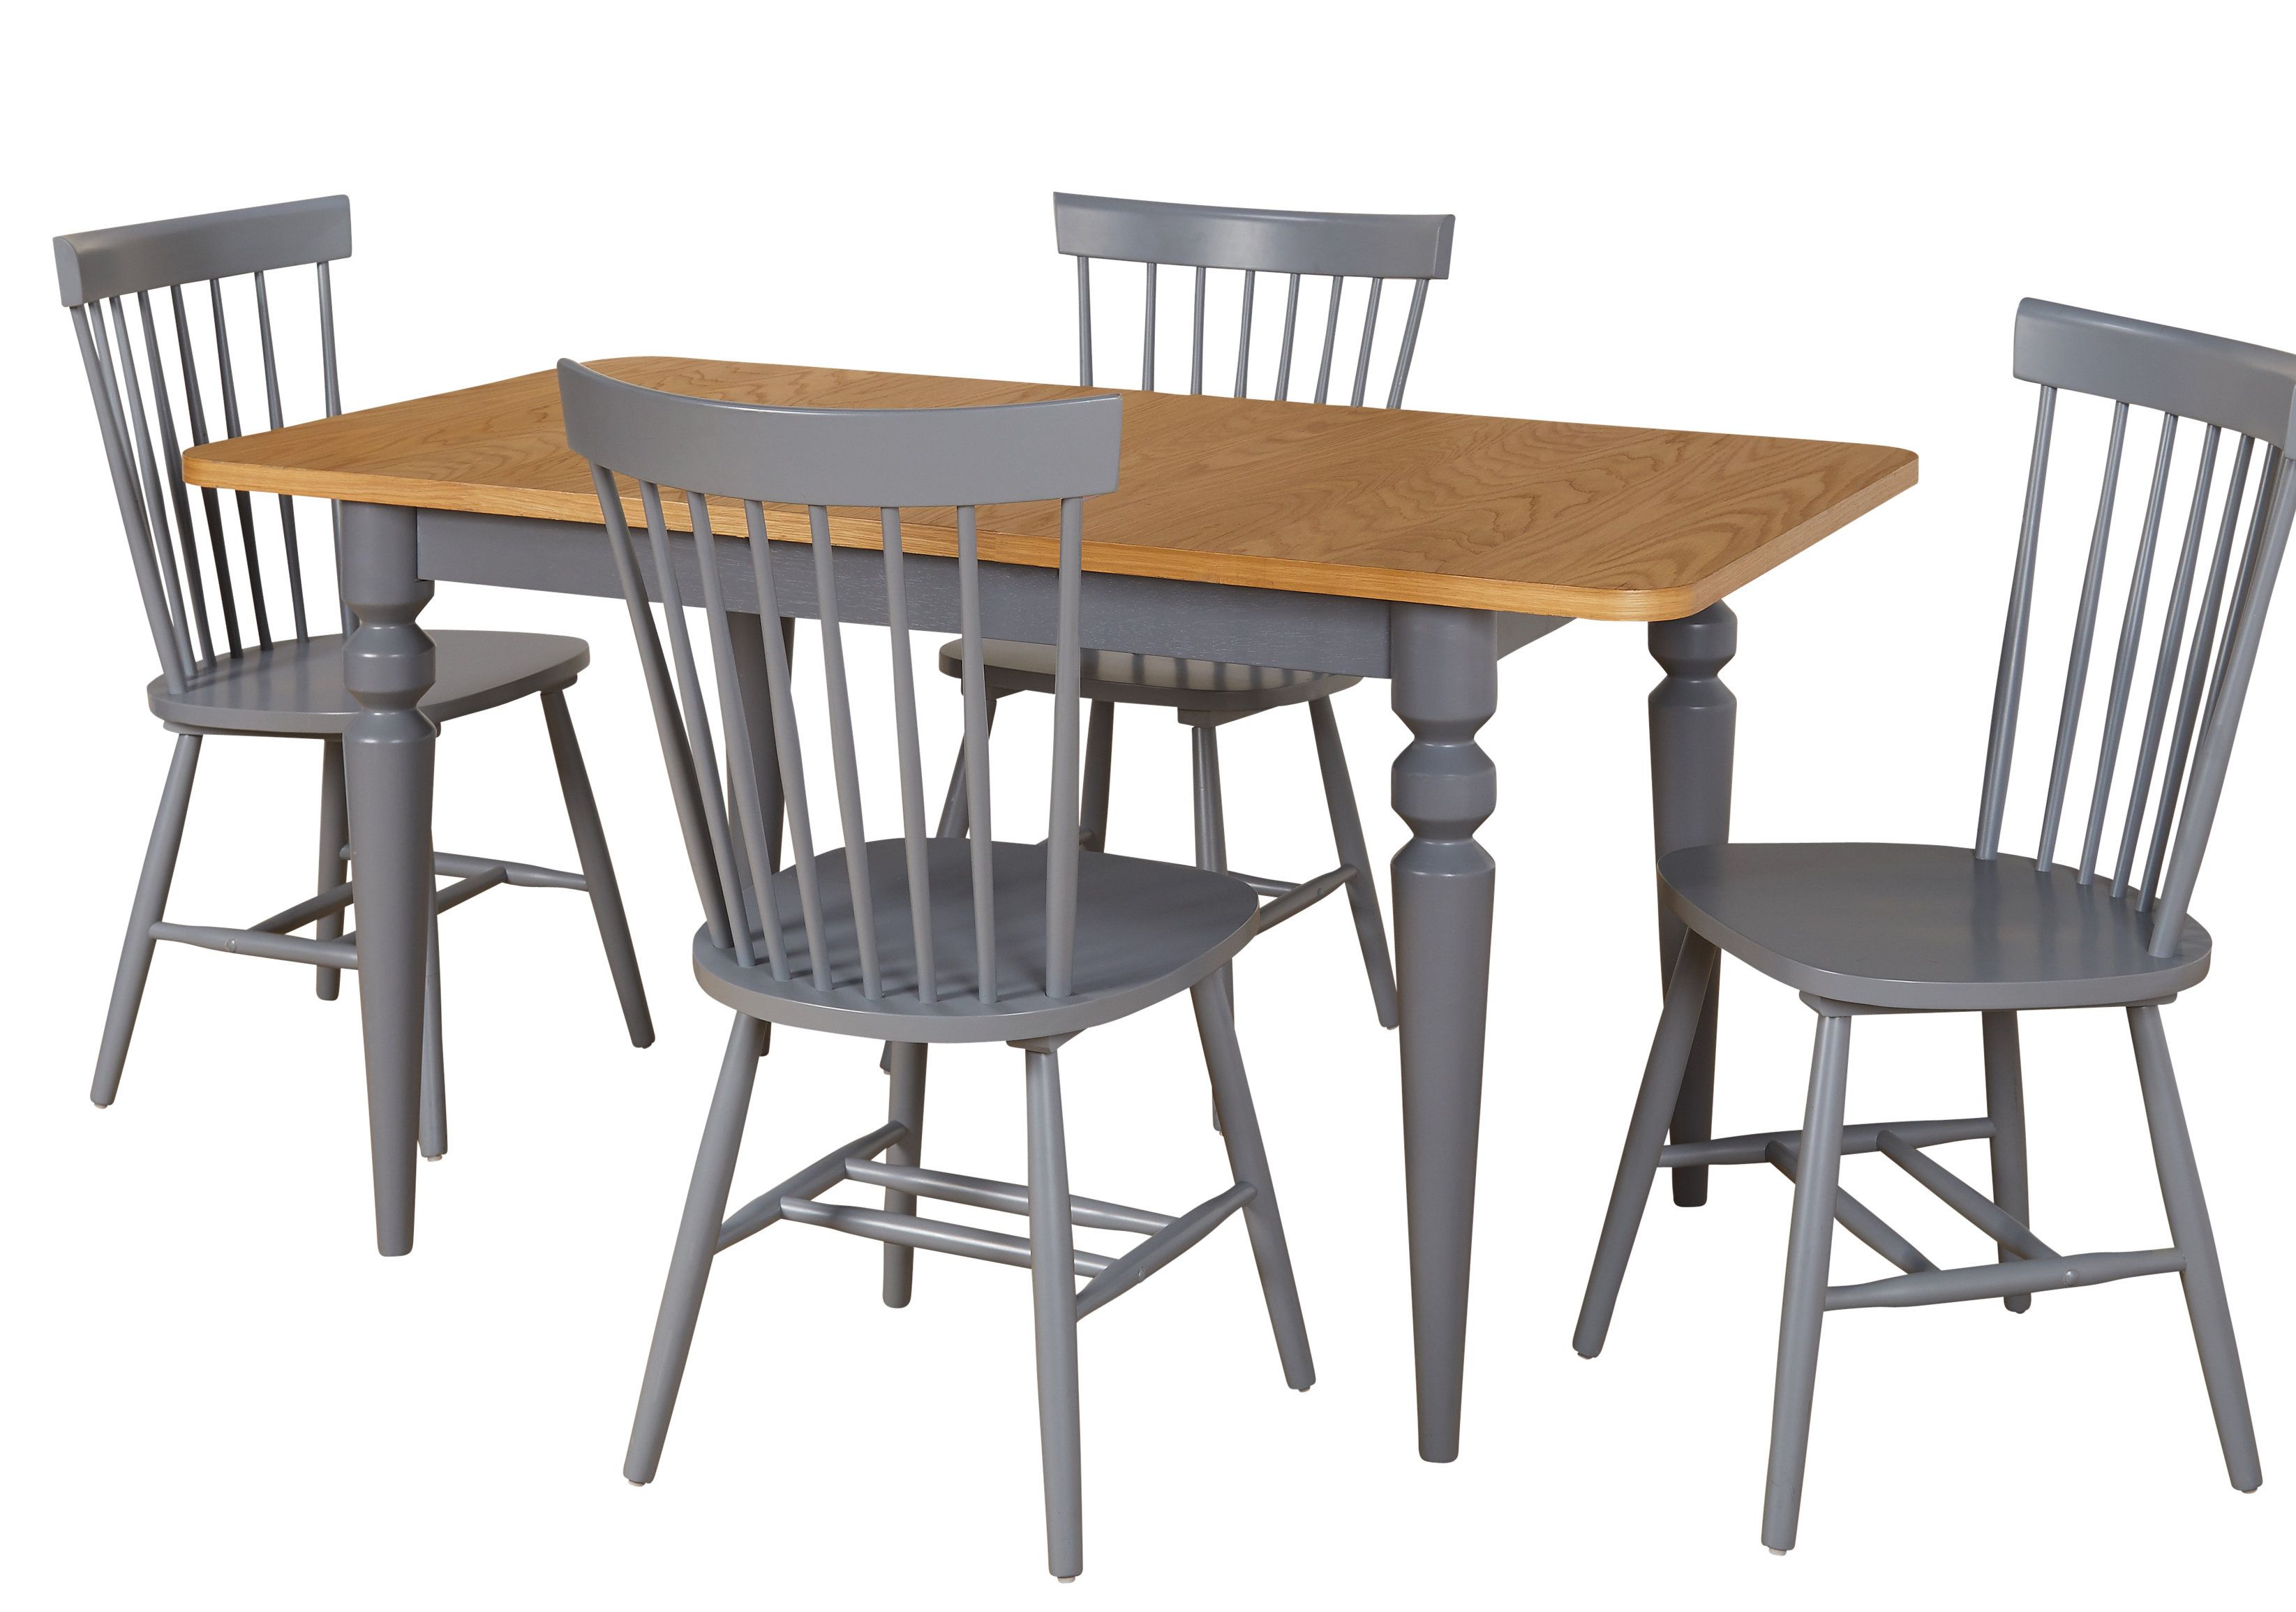 Wayfair Intended For Widely Used Ligon 3 Piece Breakfast Nook Dining Sets (View 8 of 20)